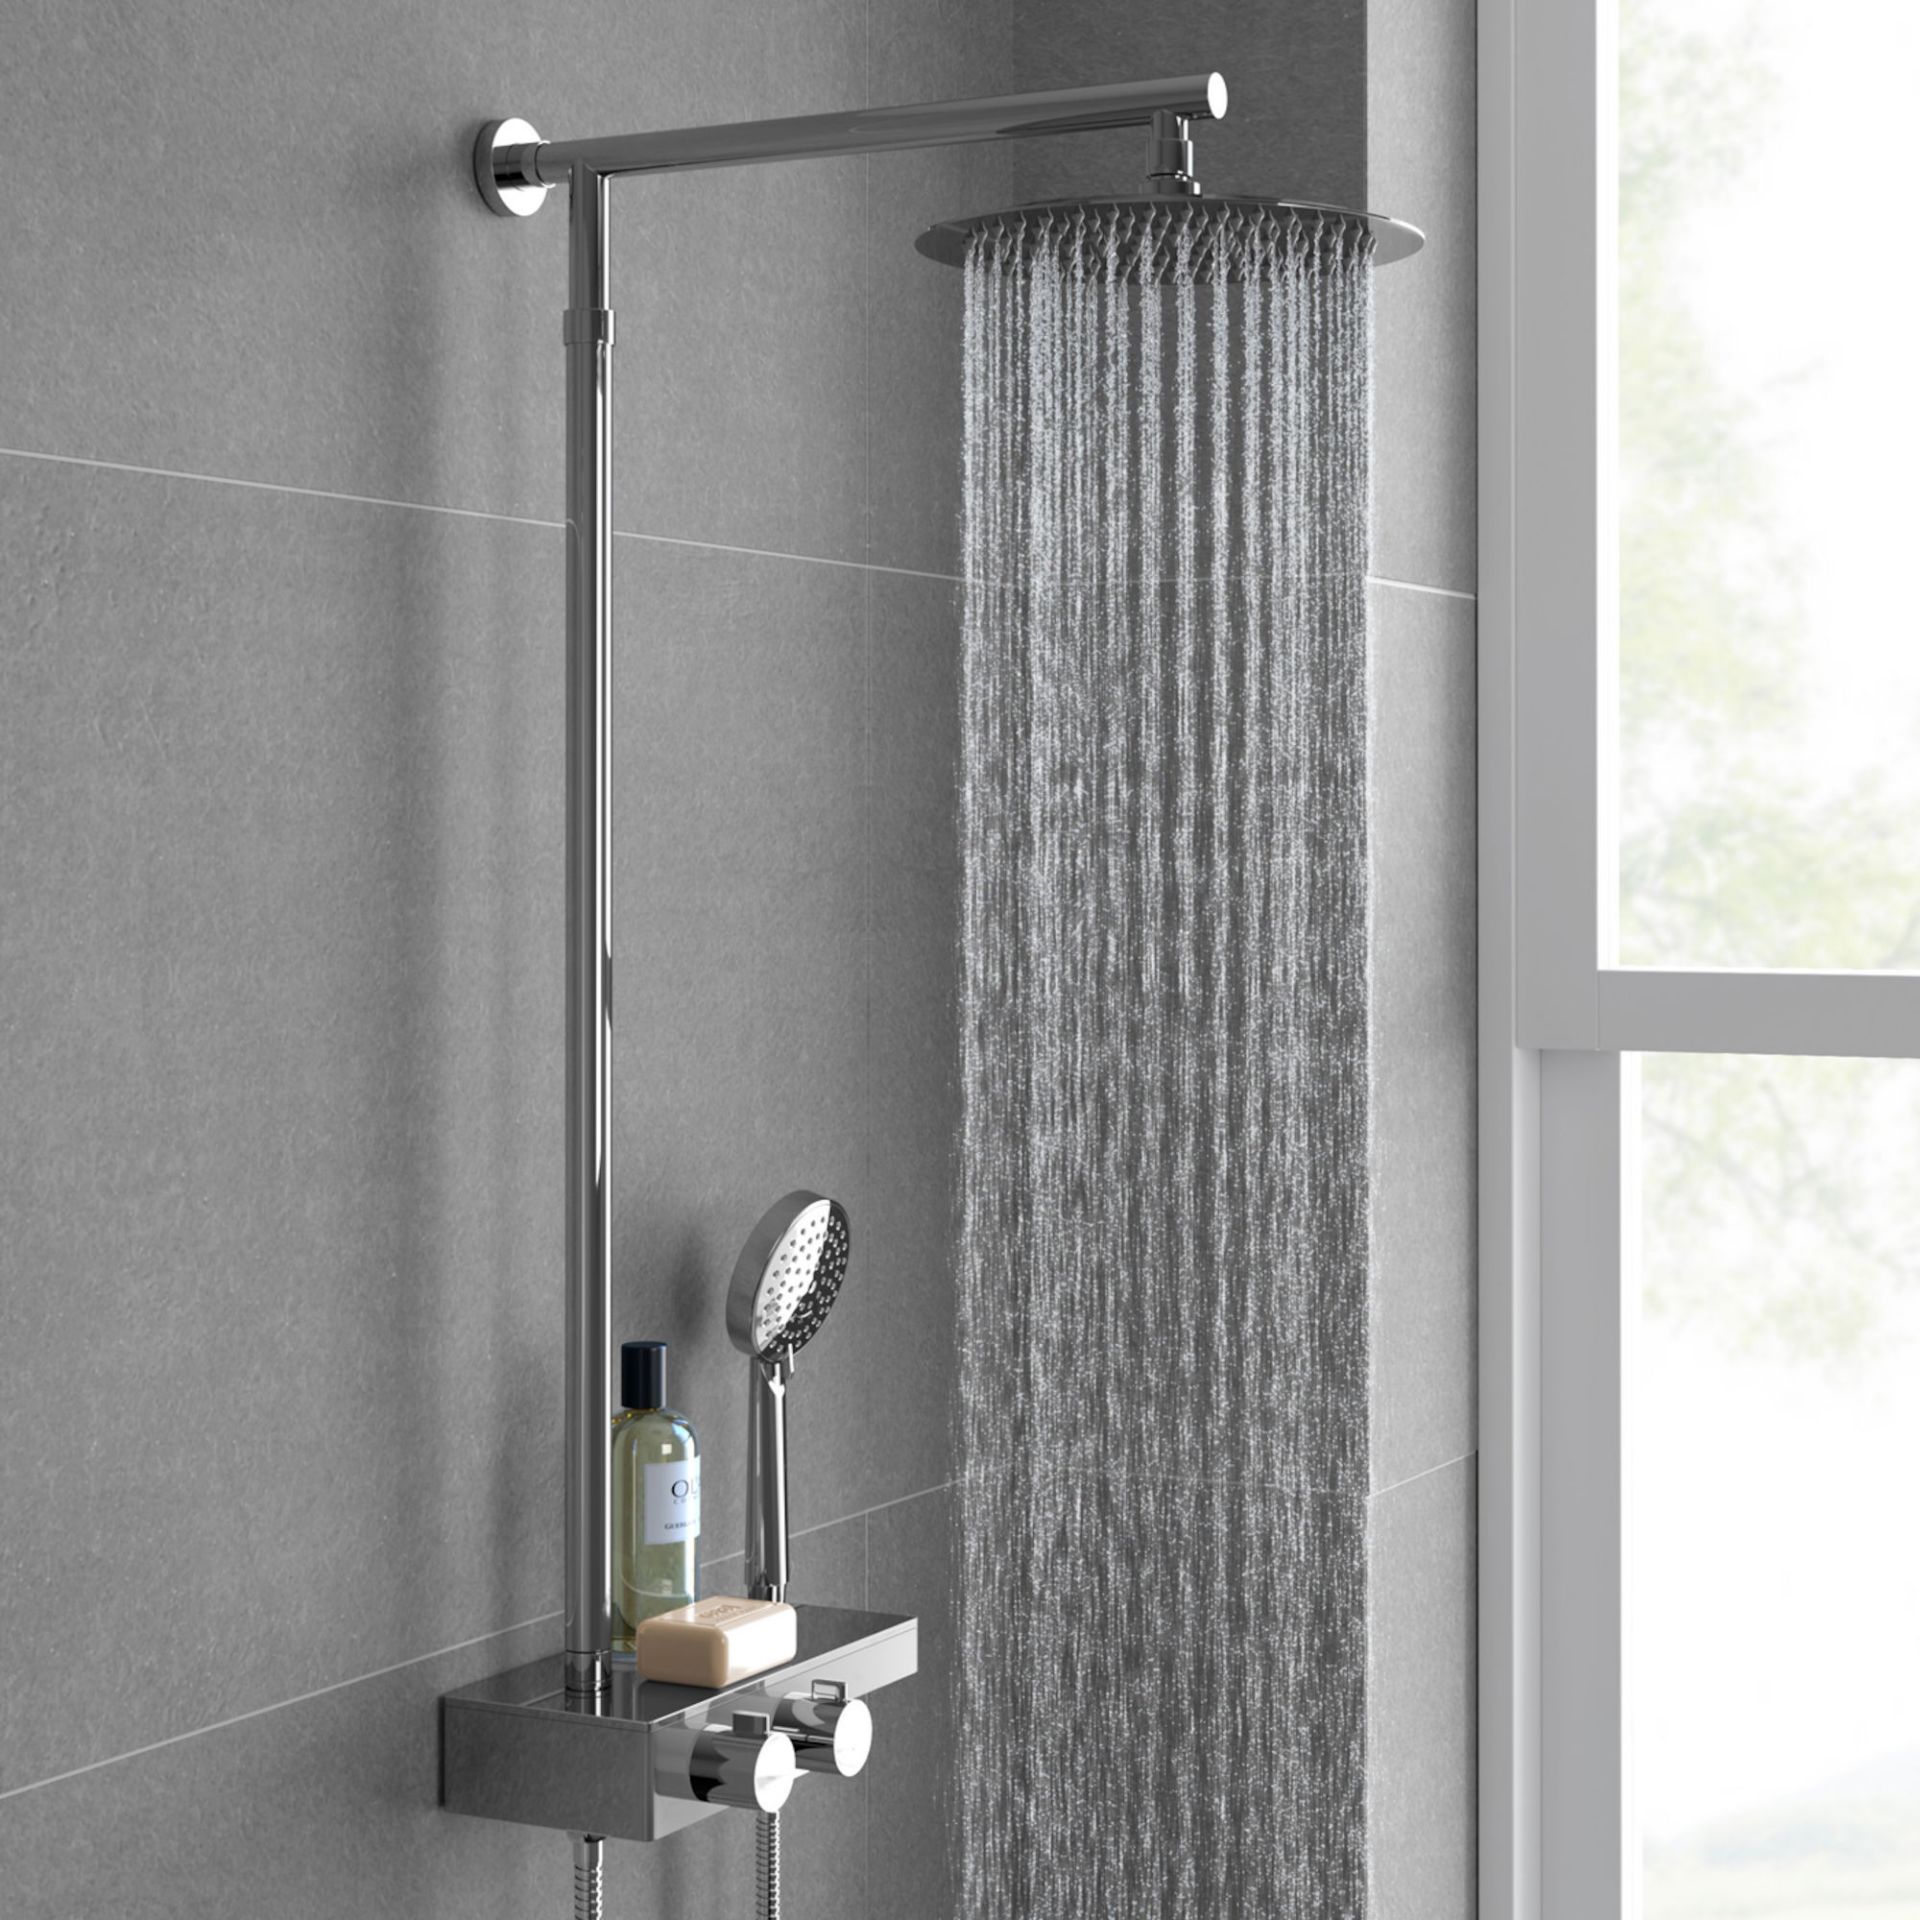 (ZL208) Round Exposed Thermostatic Mixer Shower Kit & Large Head. RRP £349.99. Cool to touch